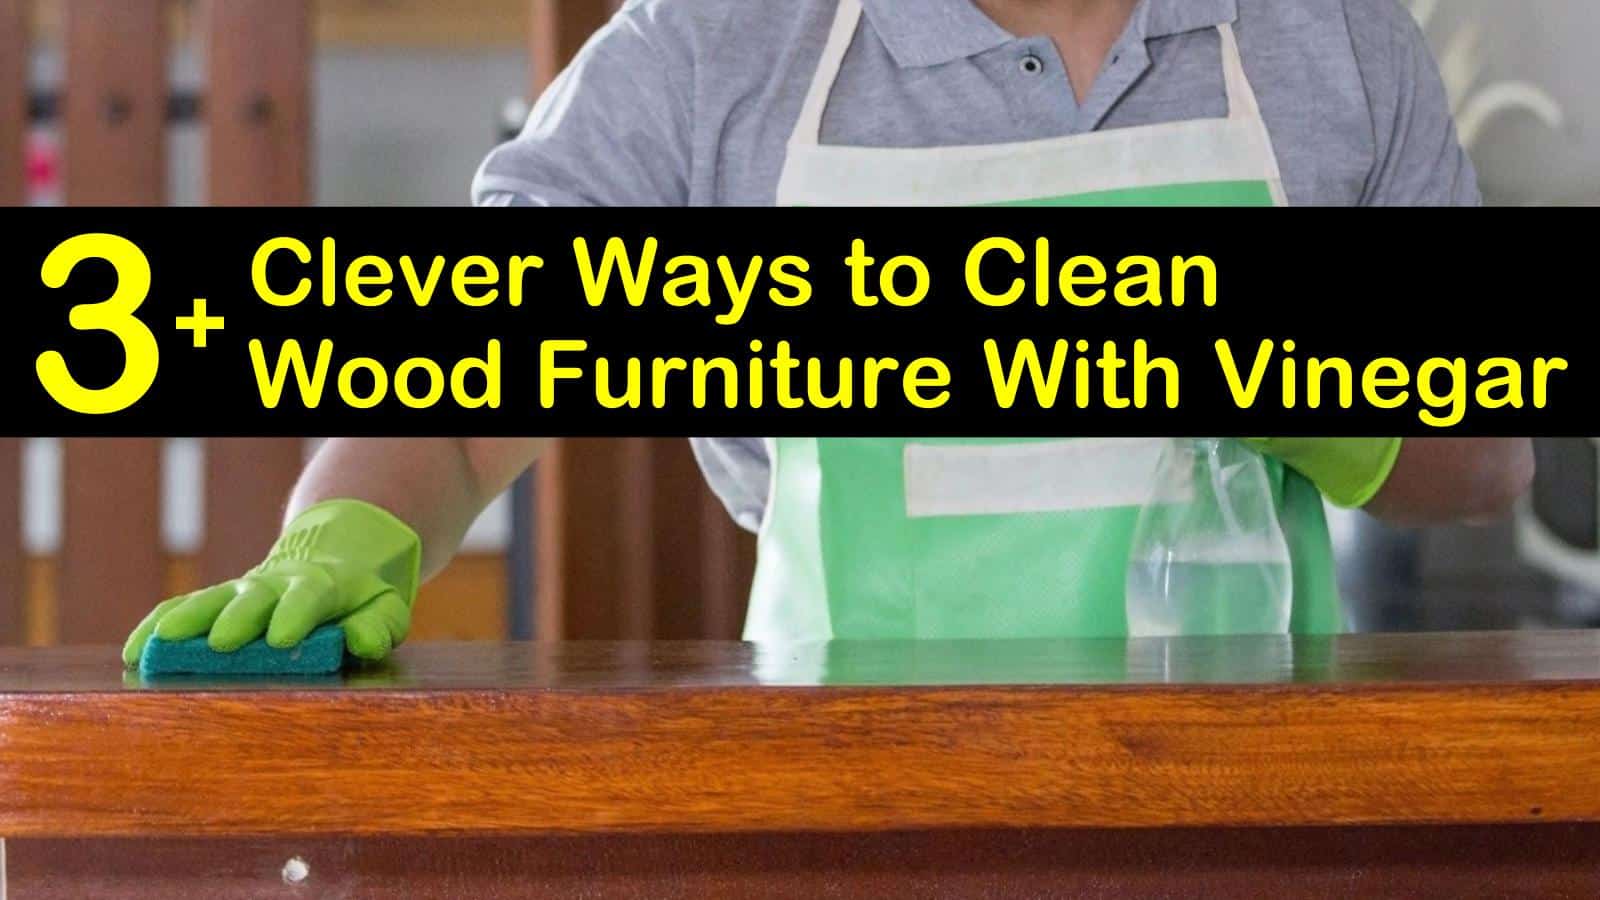 27+ Clever Ways to Clean Wood Furniture With Vinegar